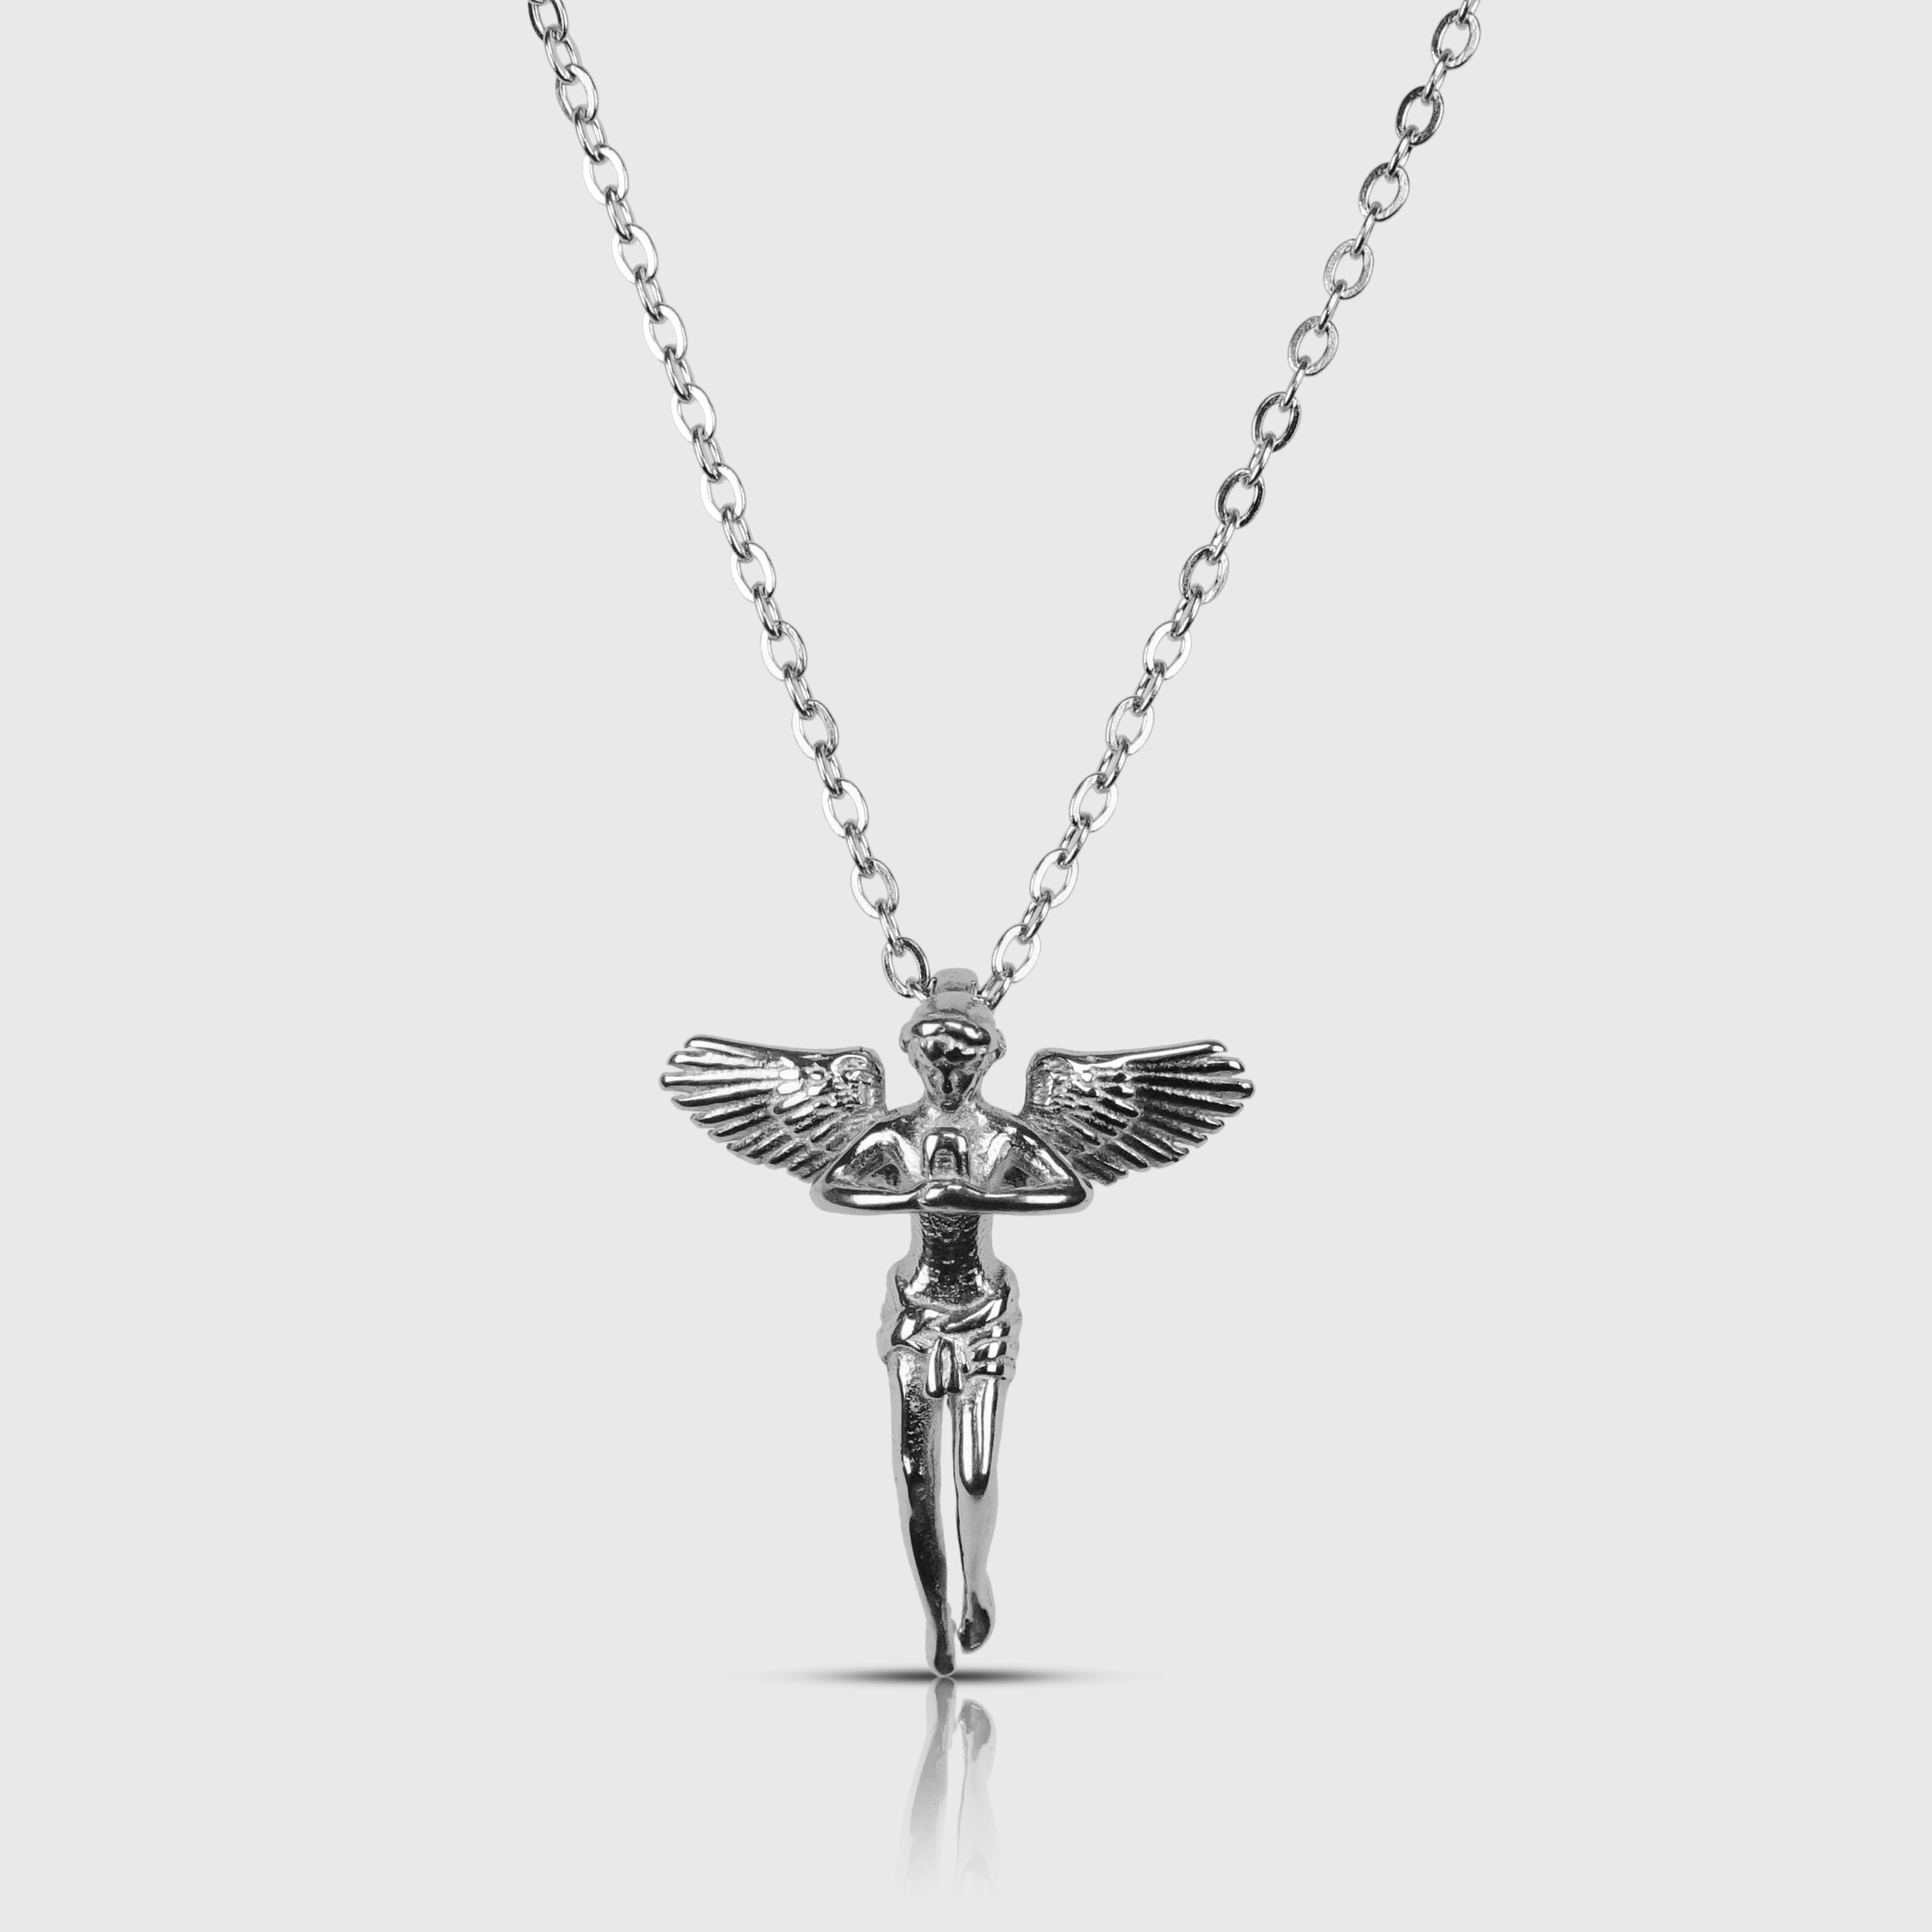 FLYING ANGEL NECKLACE - SILVER